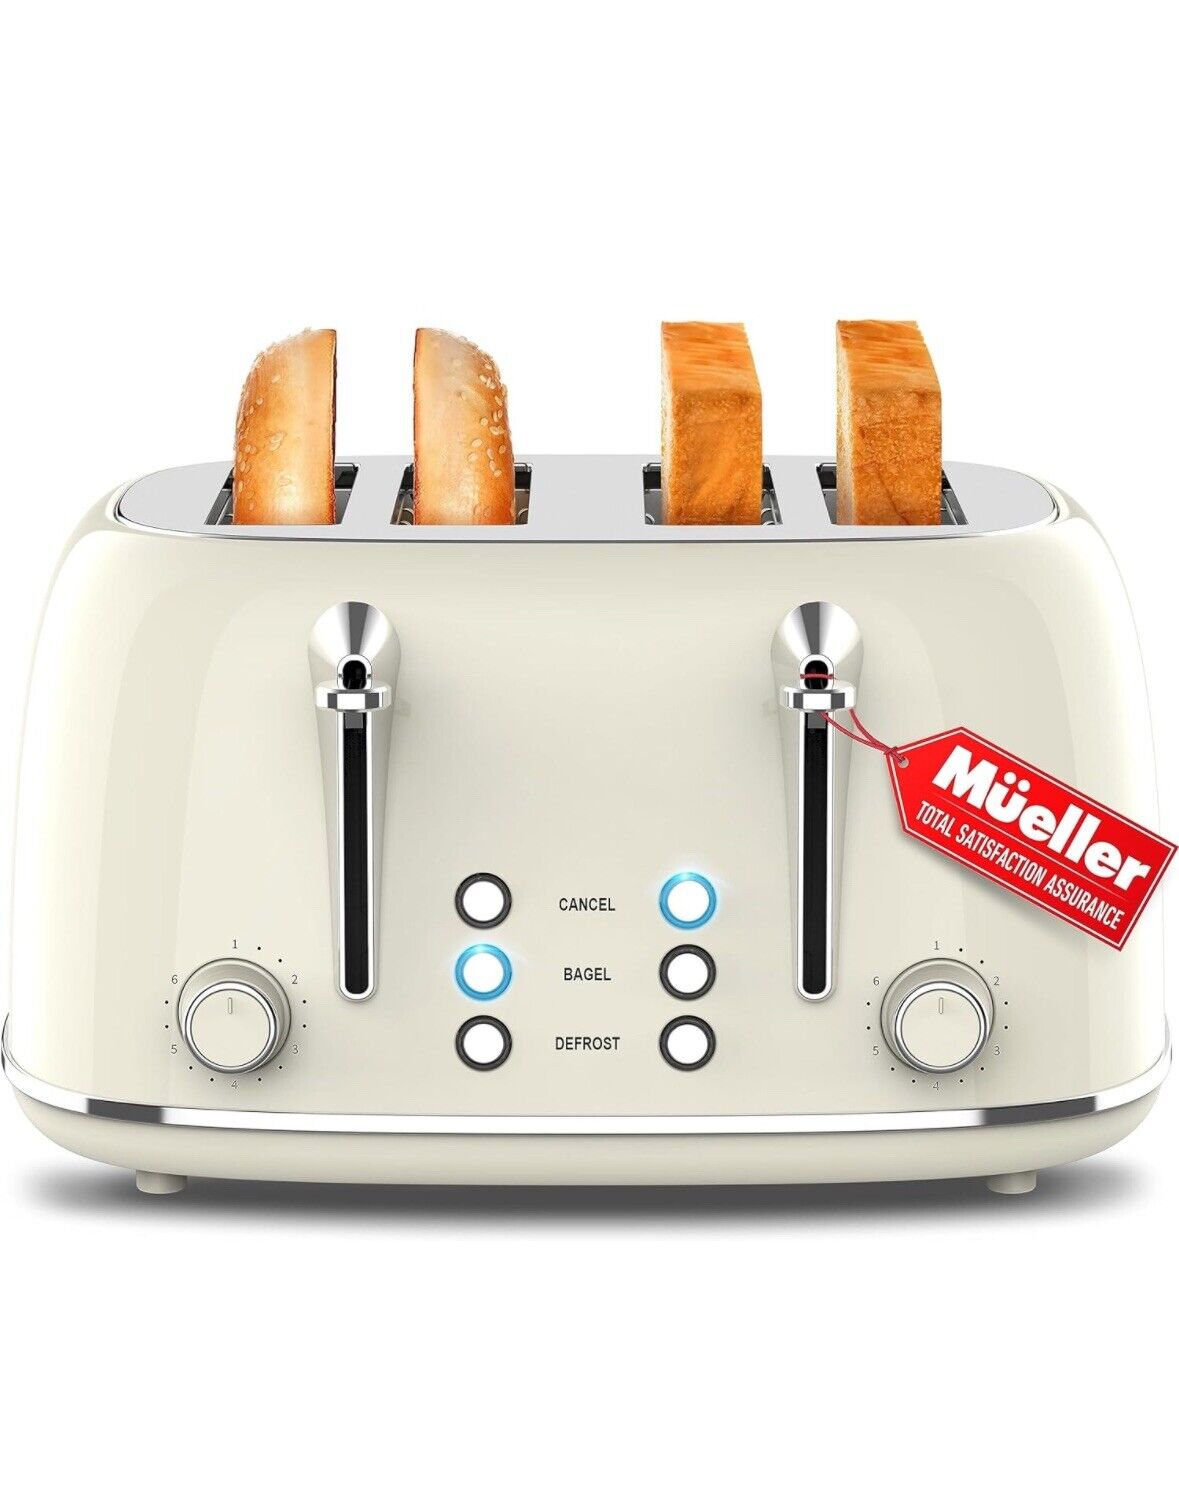 Mueller Retro Toaster 4 Slice with Extra Wide Slots Bagel, Defrost